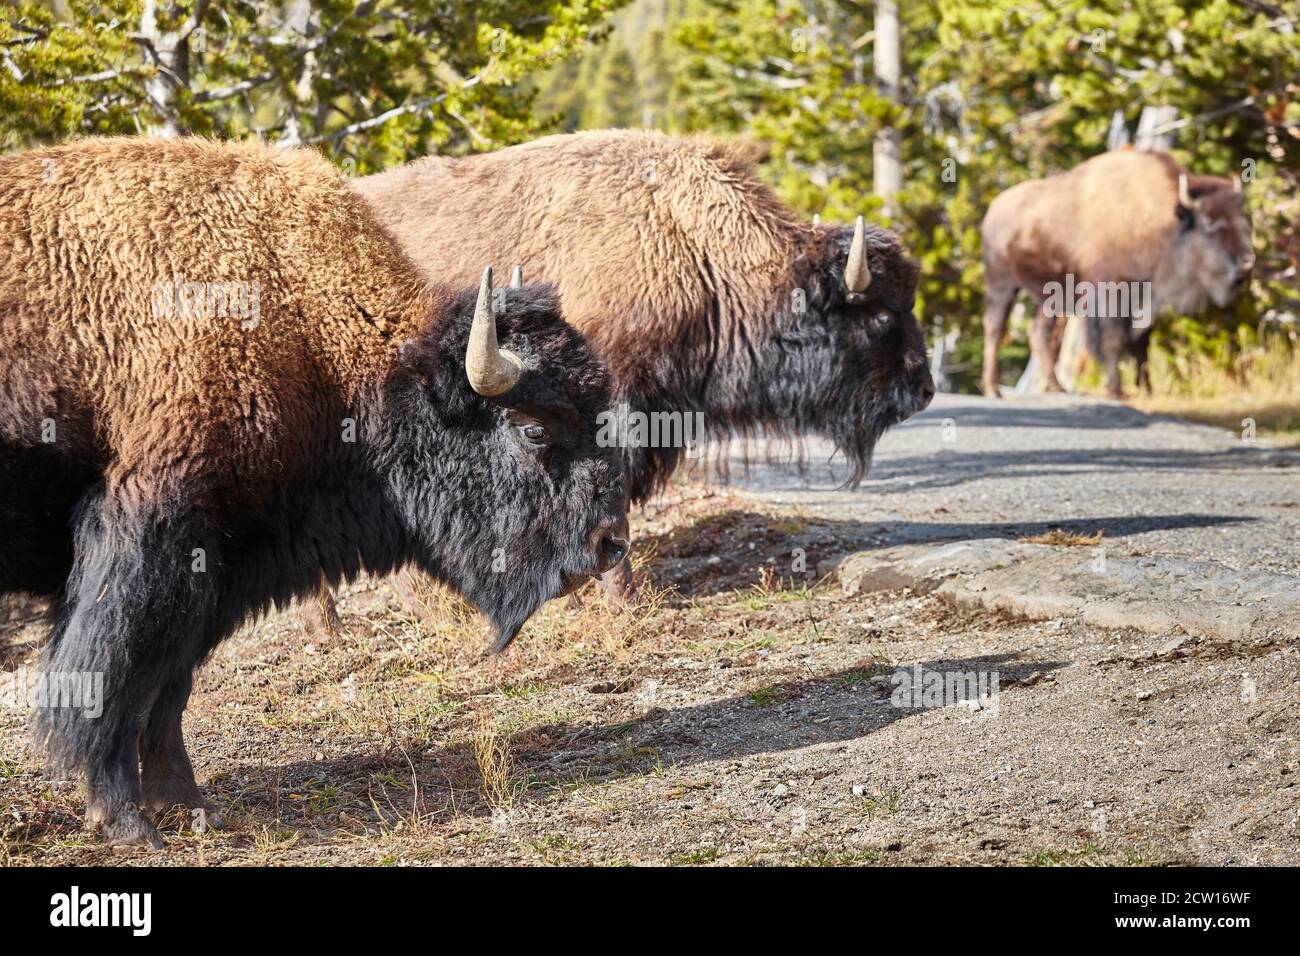 Herd of American bison (Bison bison) in Yellowstone National Park, selective focus, Wyoming, USA. Stock Photo